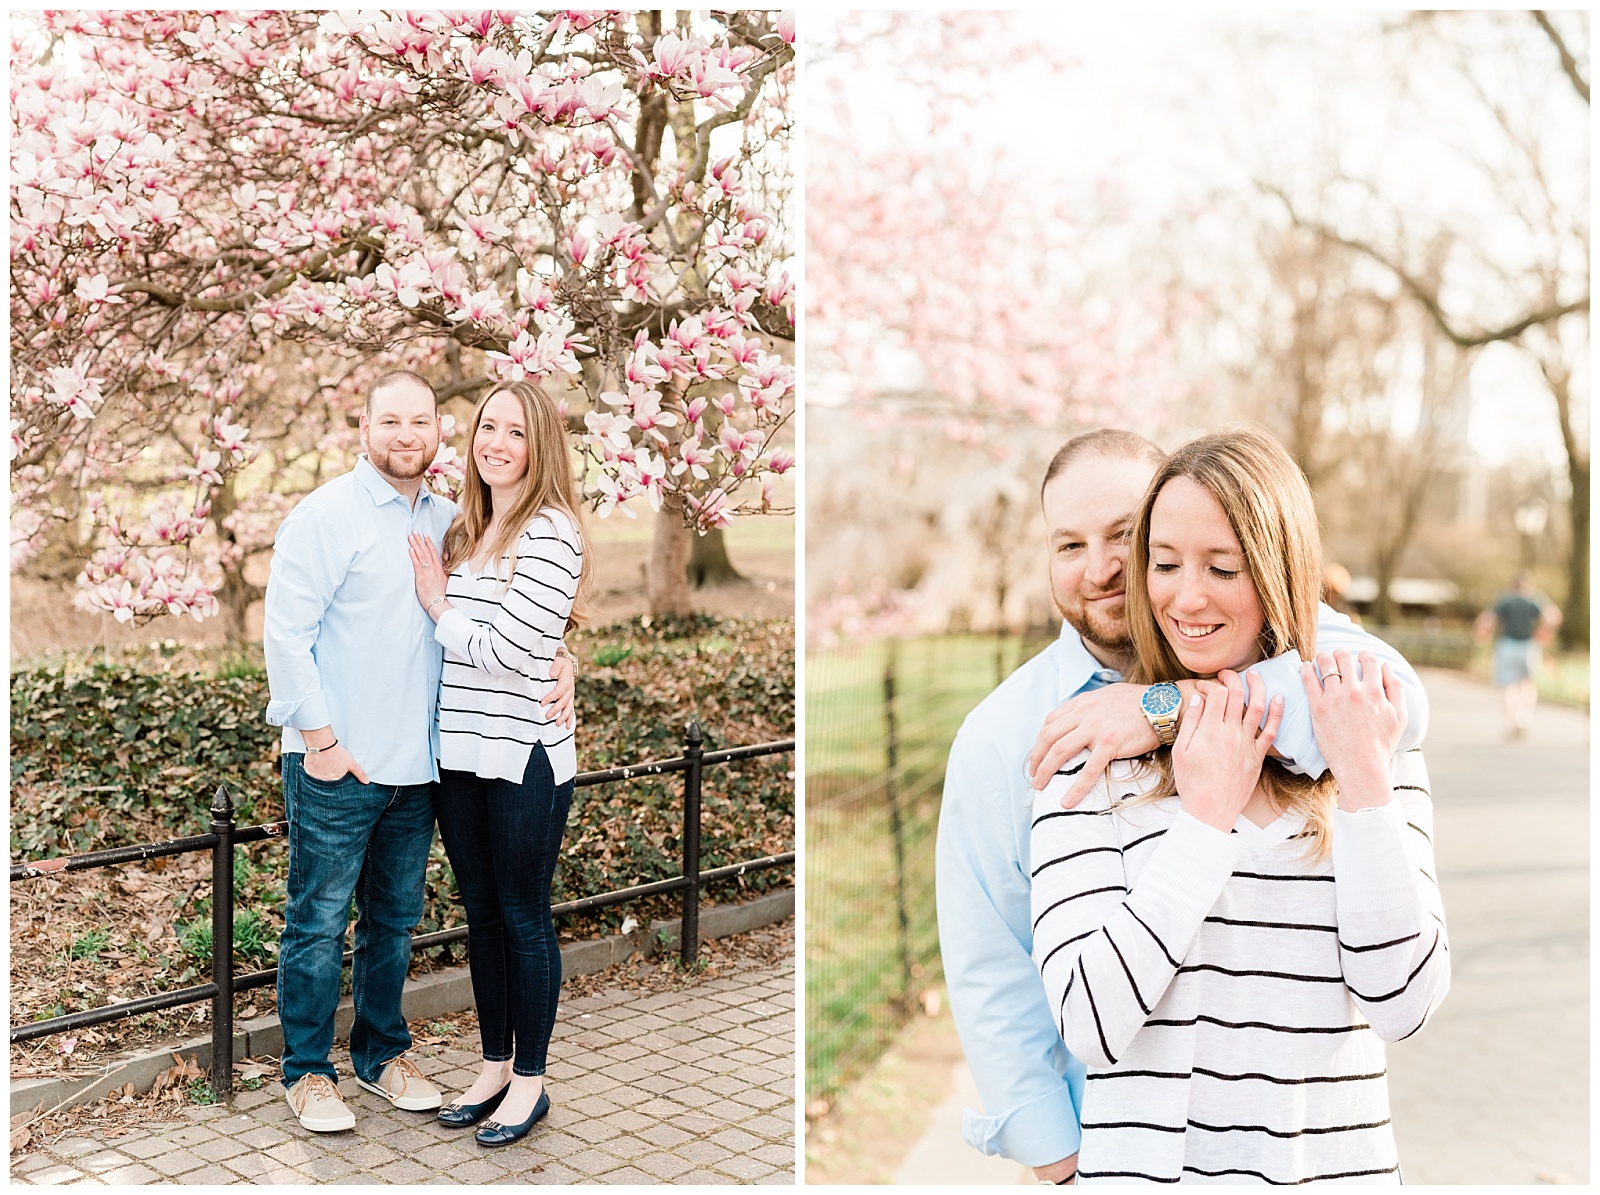 Central Park, NYC engagement session, springtime, wedding photographer, New York, cherry blossom, blooming